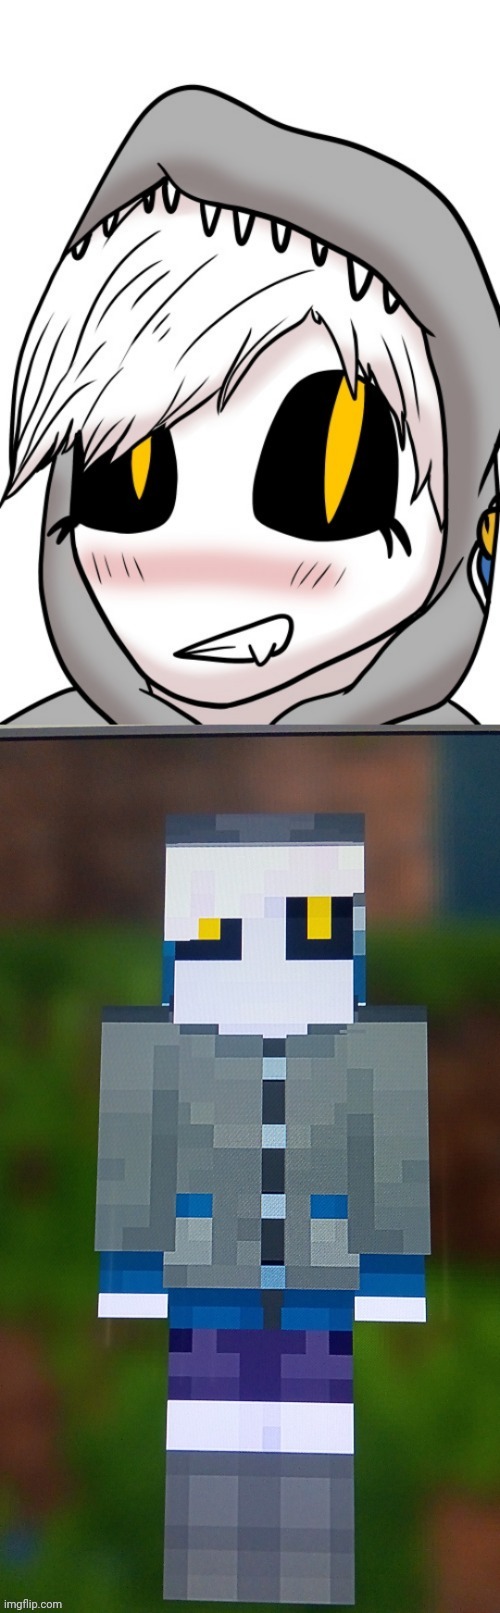 I did some art of my Minecraft skin cuz why not - Imgflip